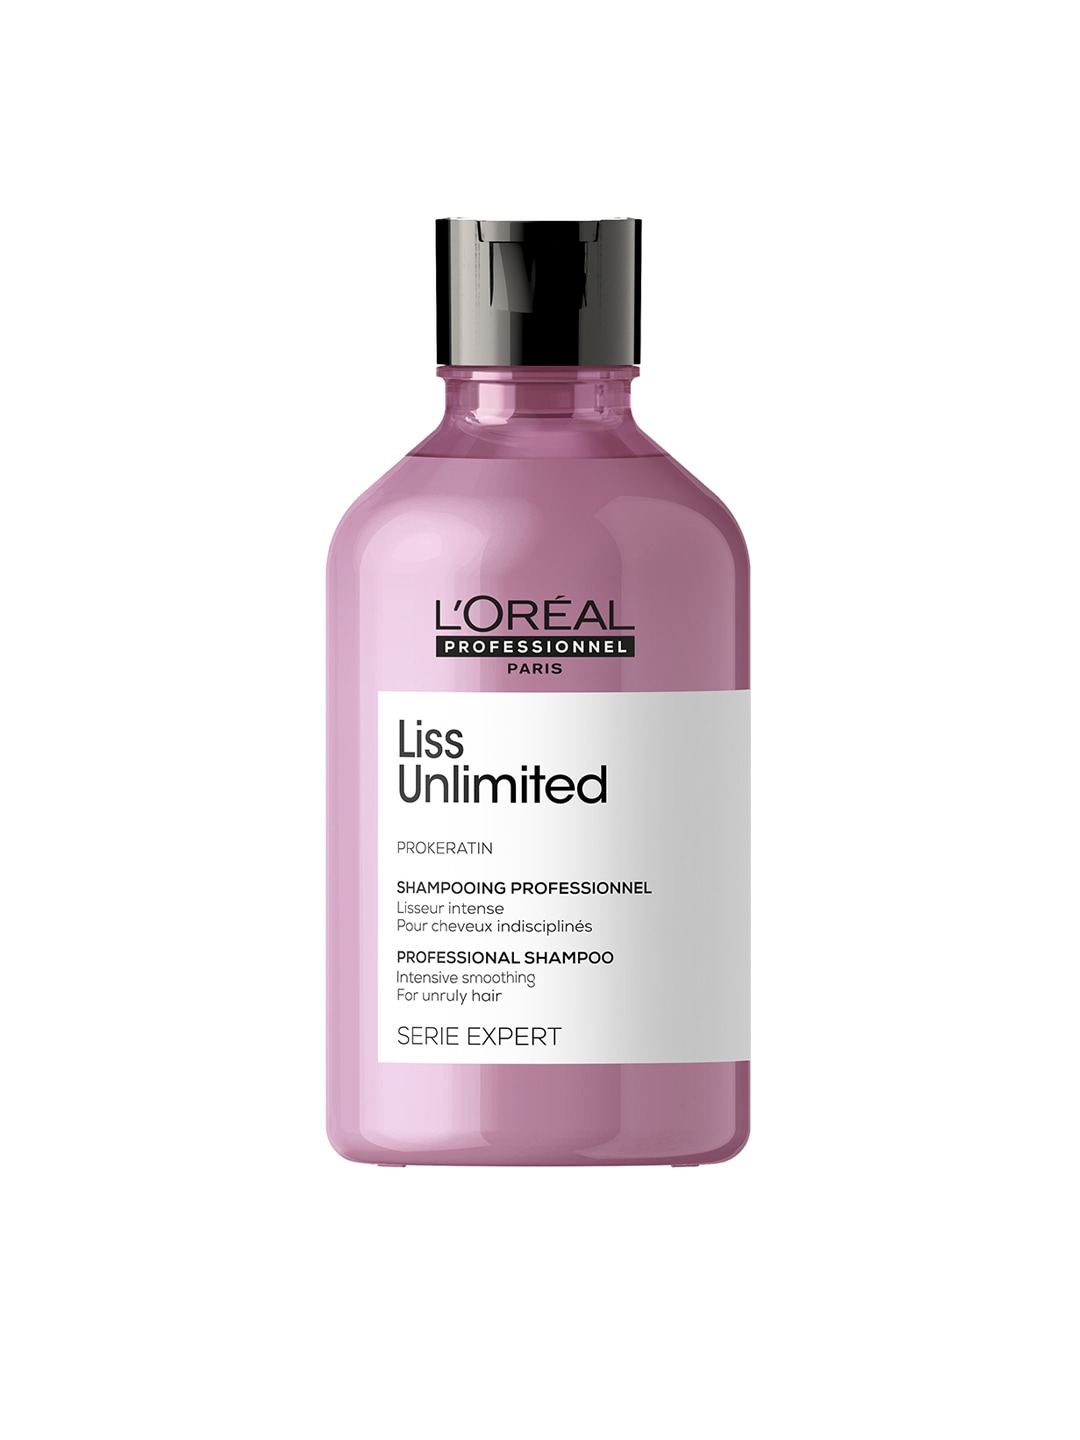 LOreal Professionnel Serie Expert Liss Unlimited Shampoo - 300 ml Price in India